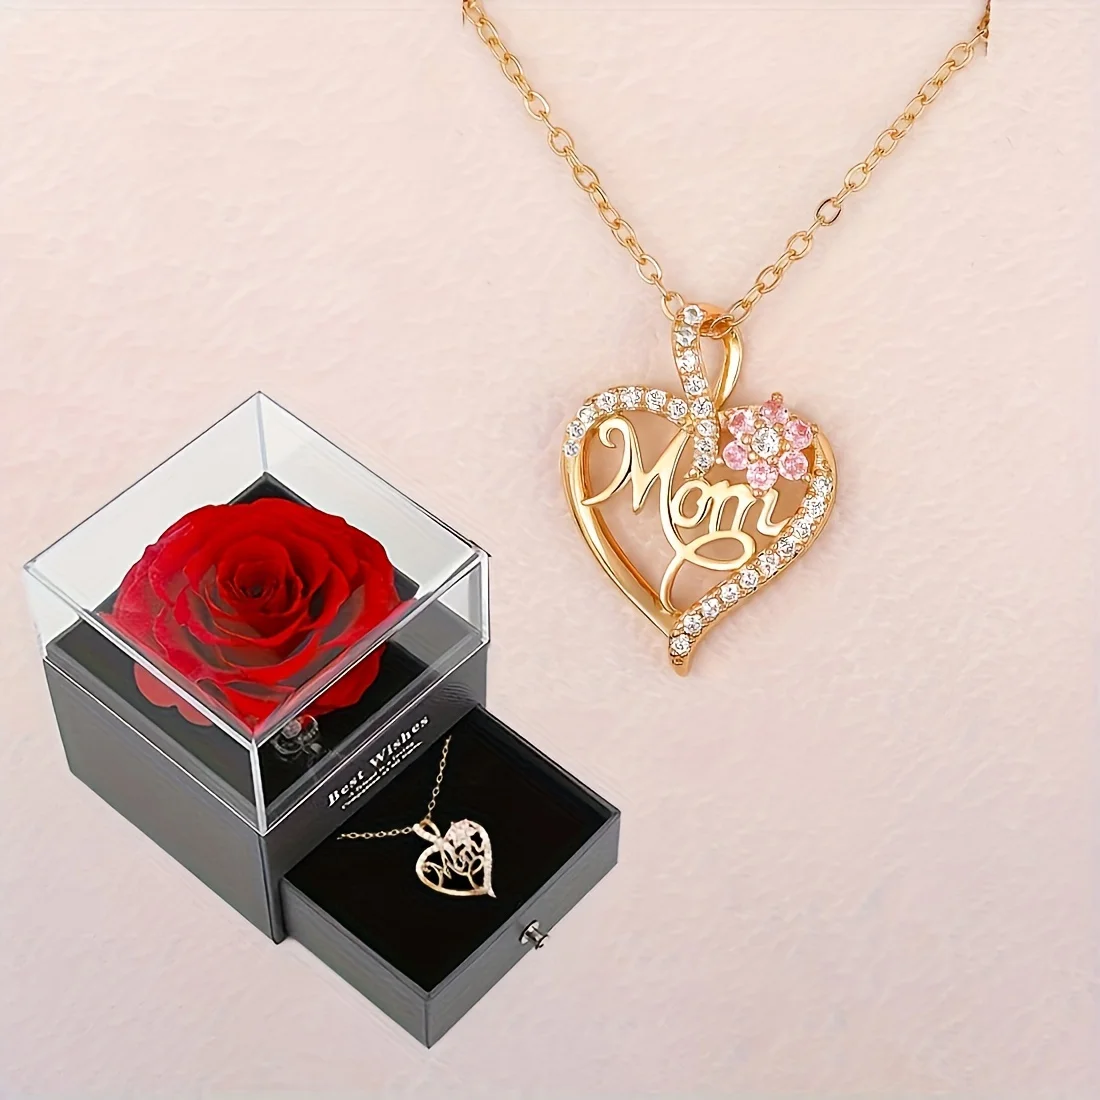 Heart Pendant Necklace With Rose Gift Box For Mom